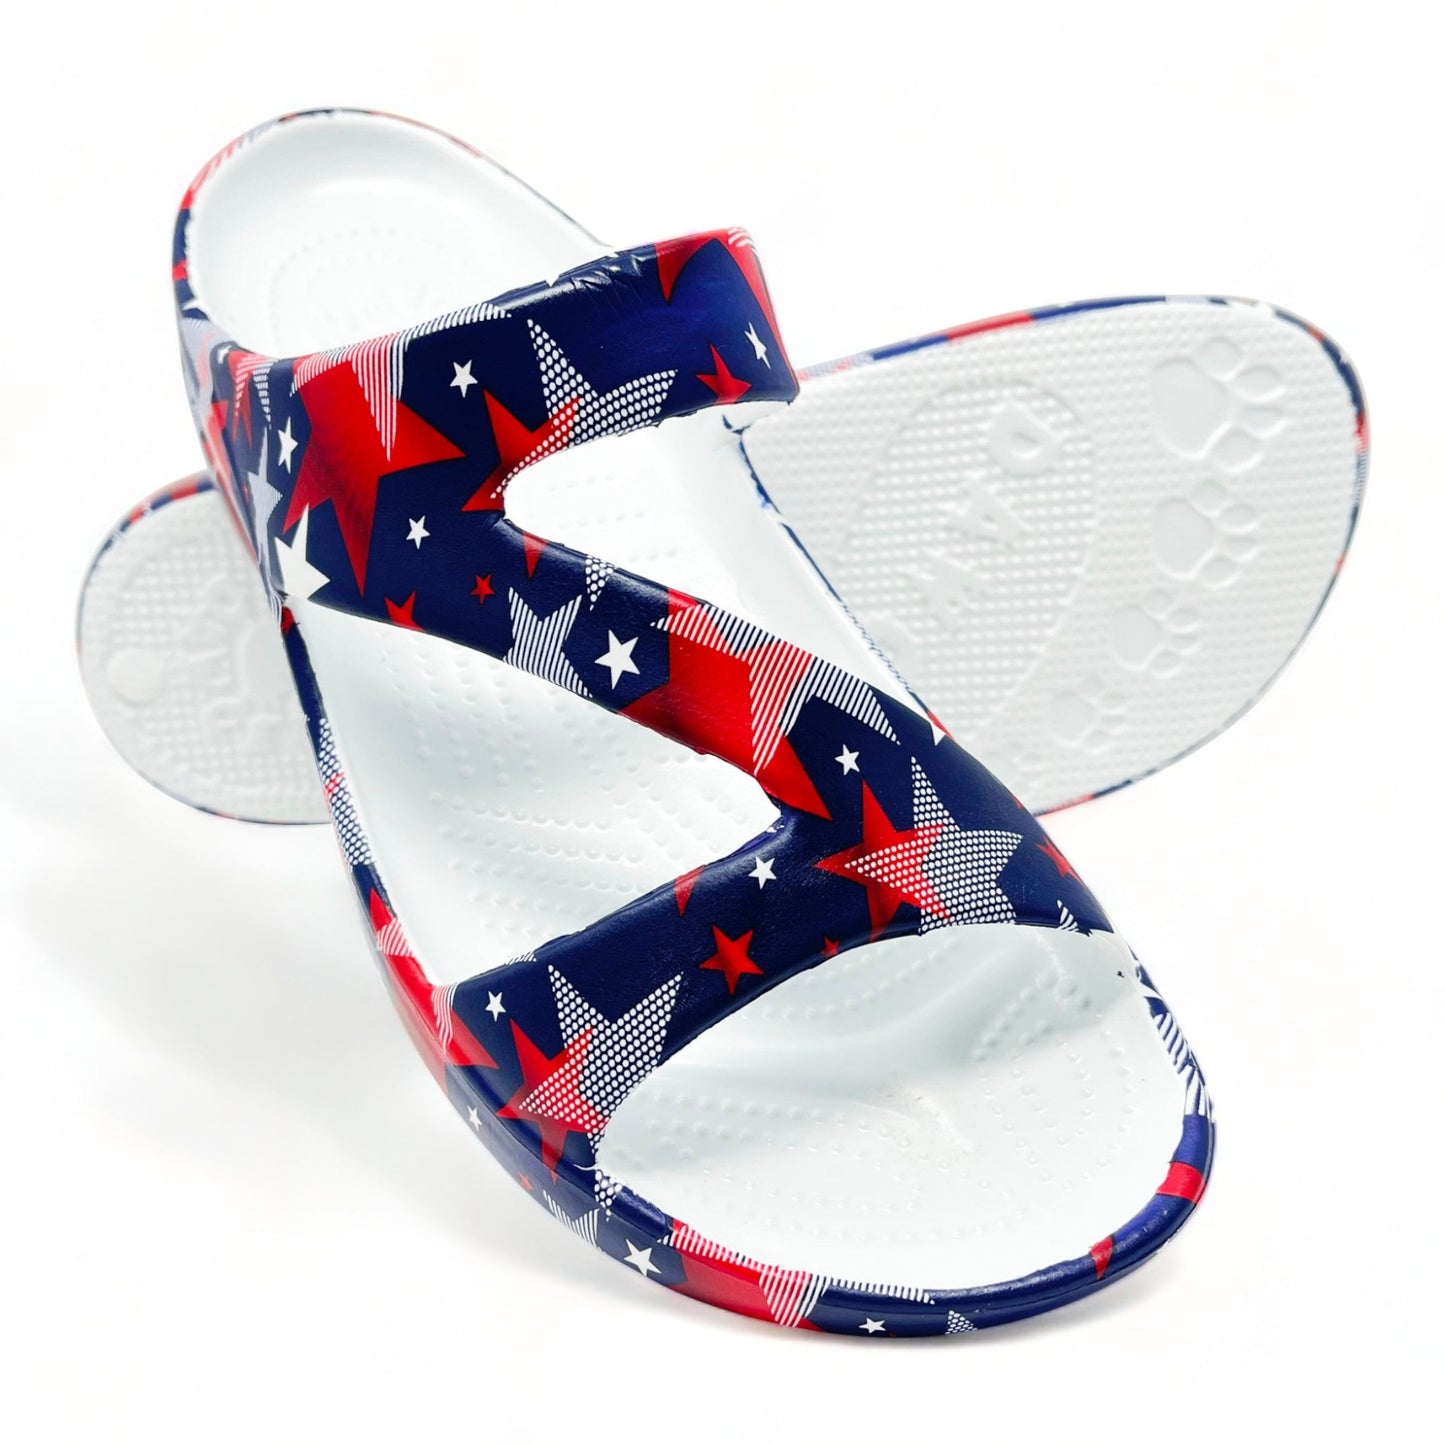 Women's PAW Print Z Sandals - Stars Forever by DAWGS USA